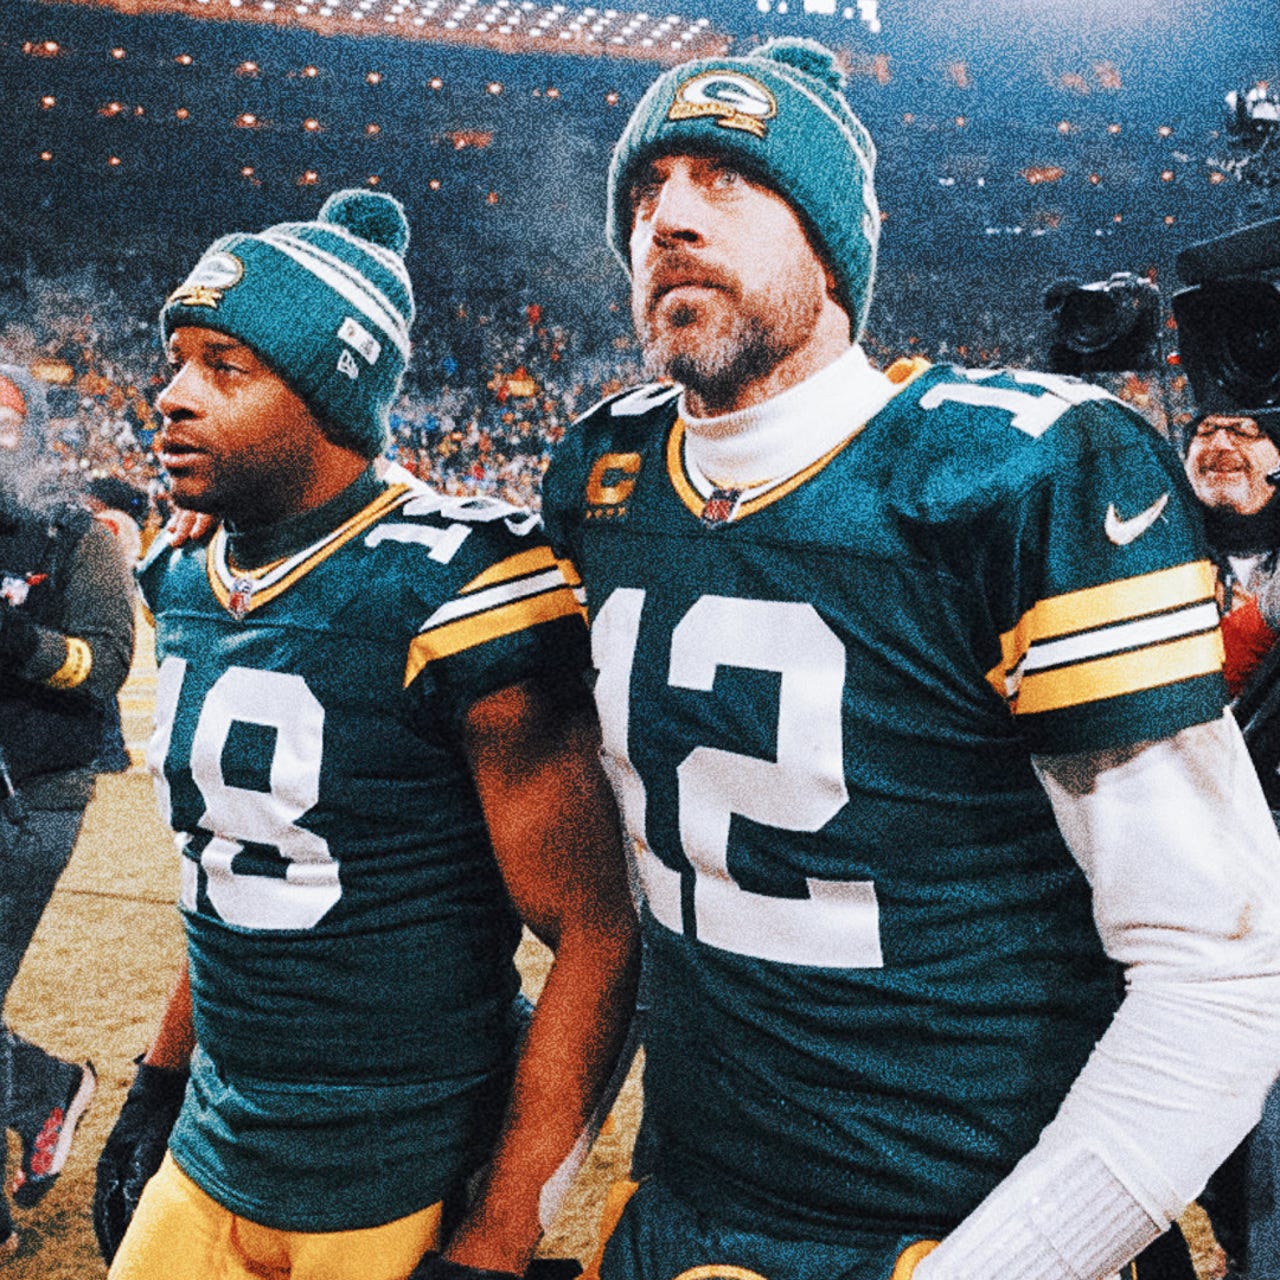 When was the last time the Packers played in the Super Bowl?